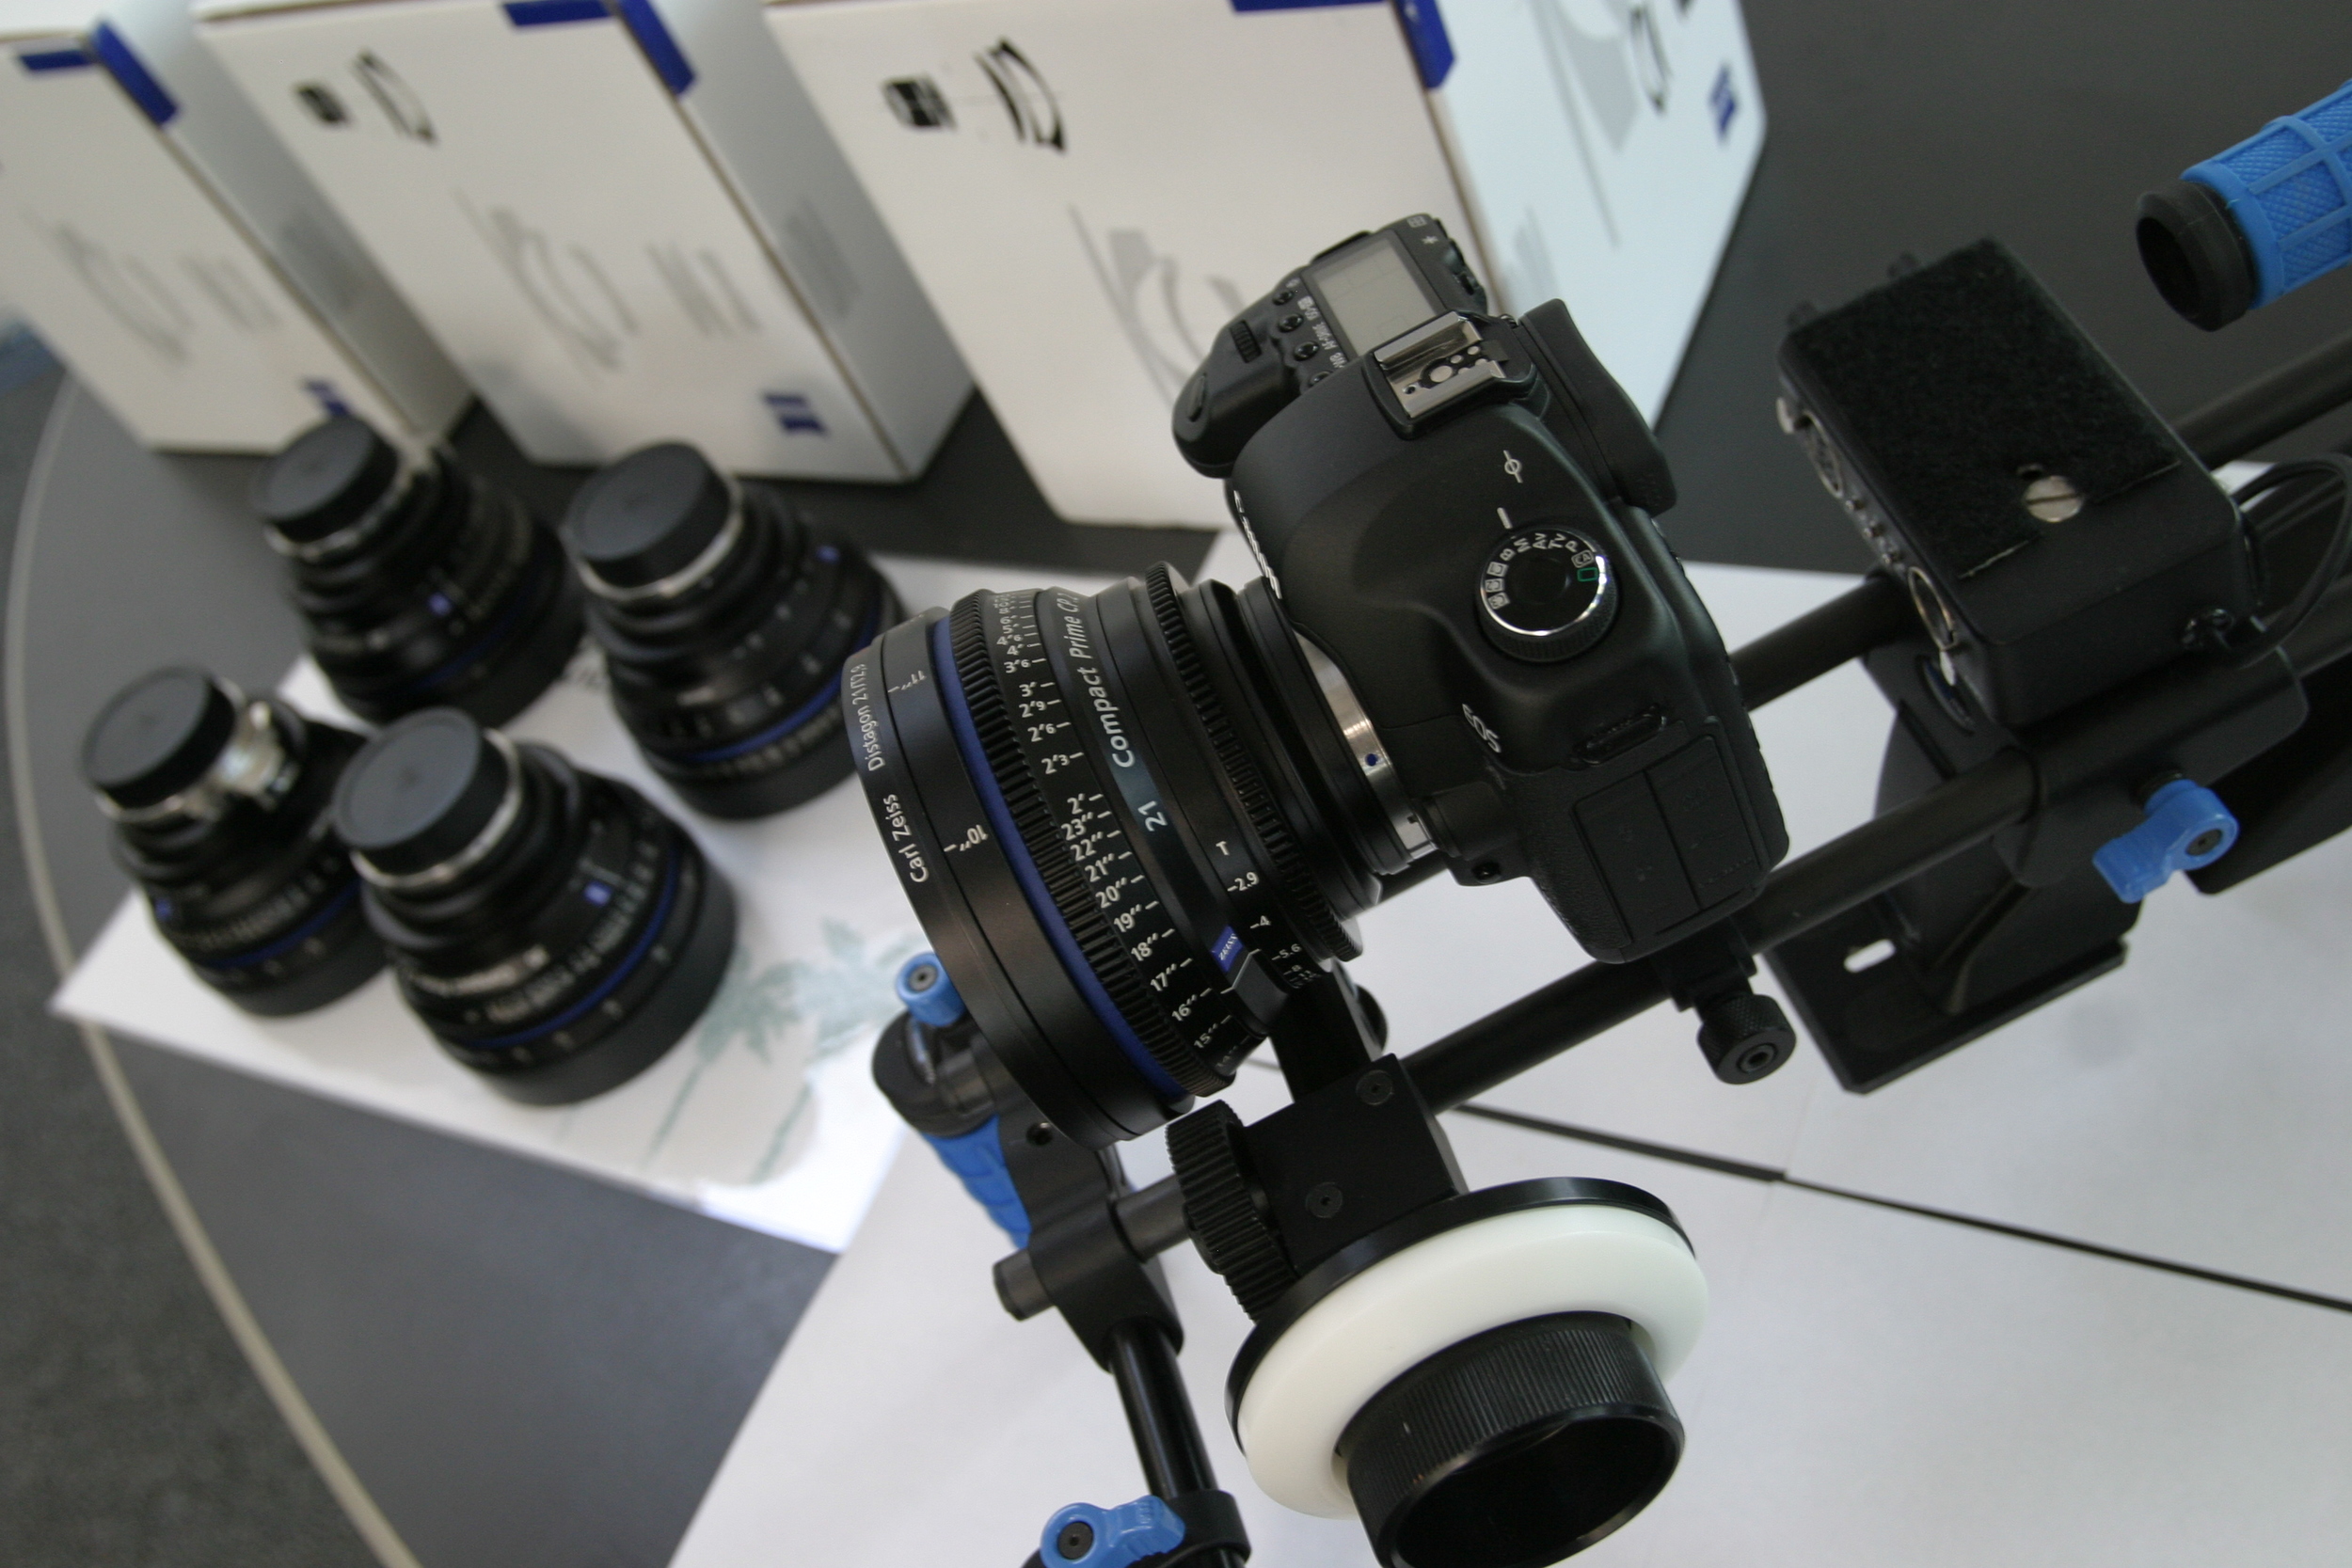 Zeiss sent Compact Prime lenses for evaluation